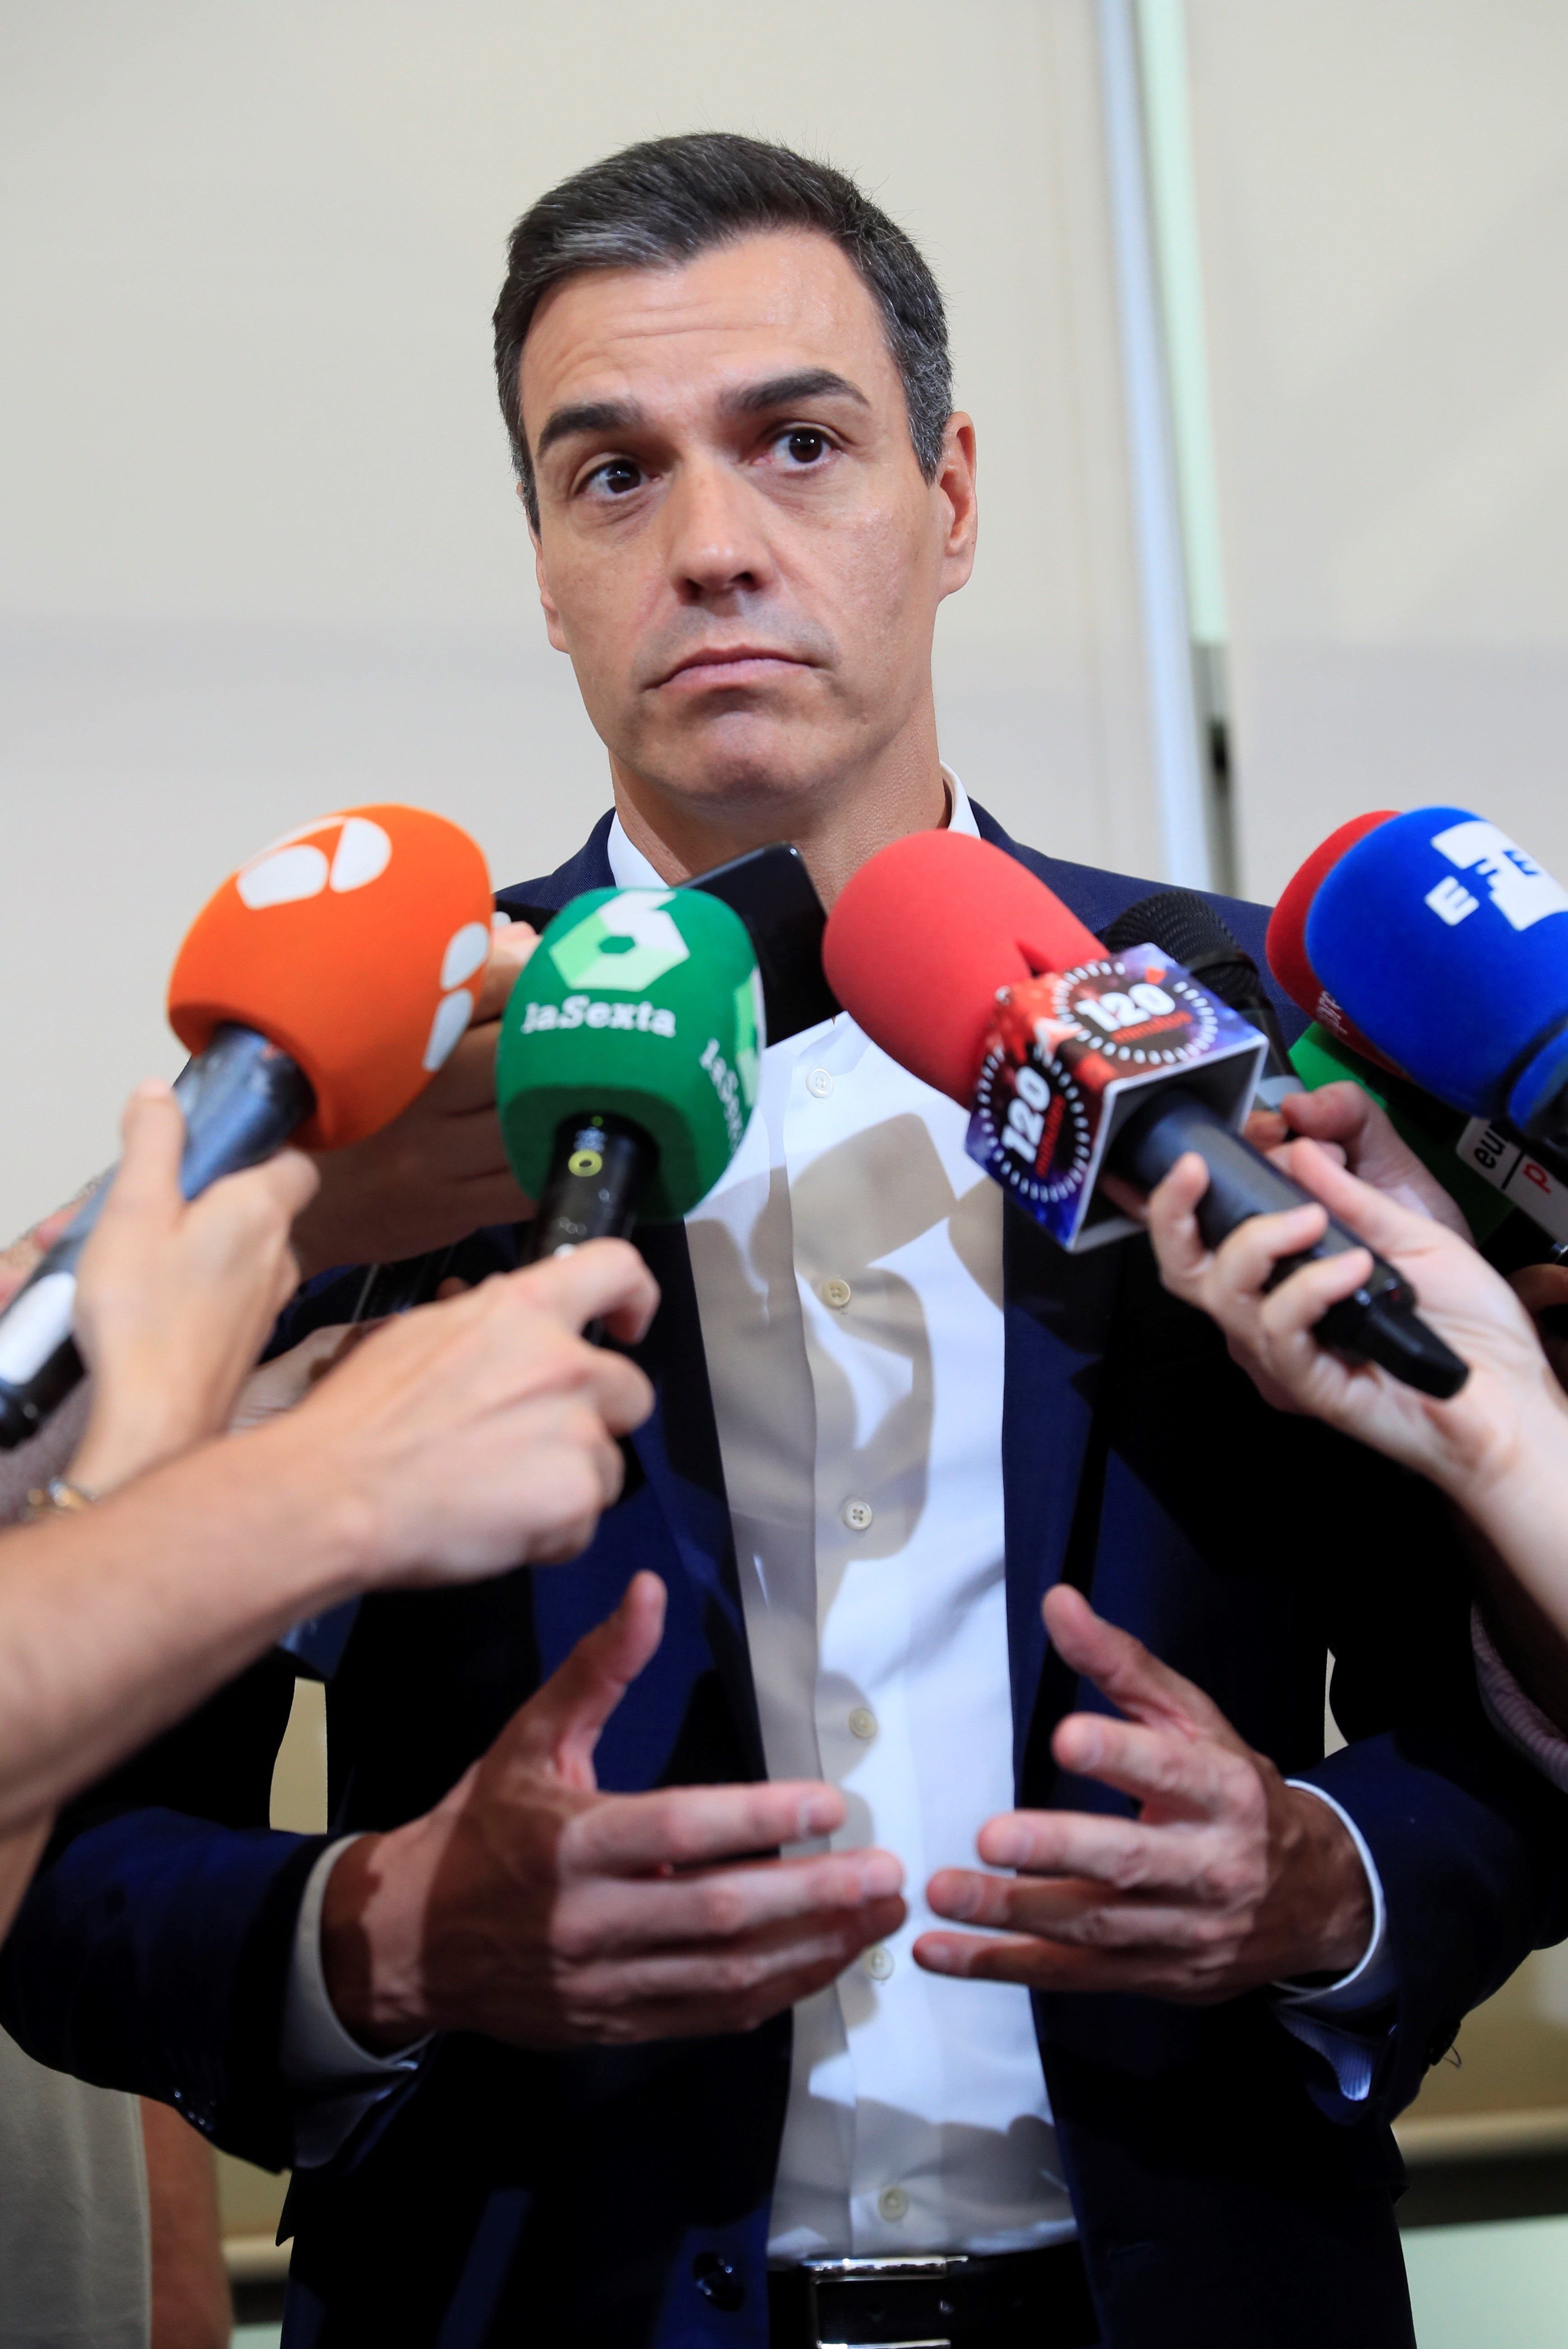 Sánchez opens up to negotiate the investiture with “Catalan nationalist forces"